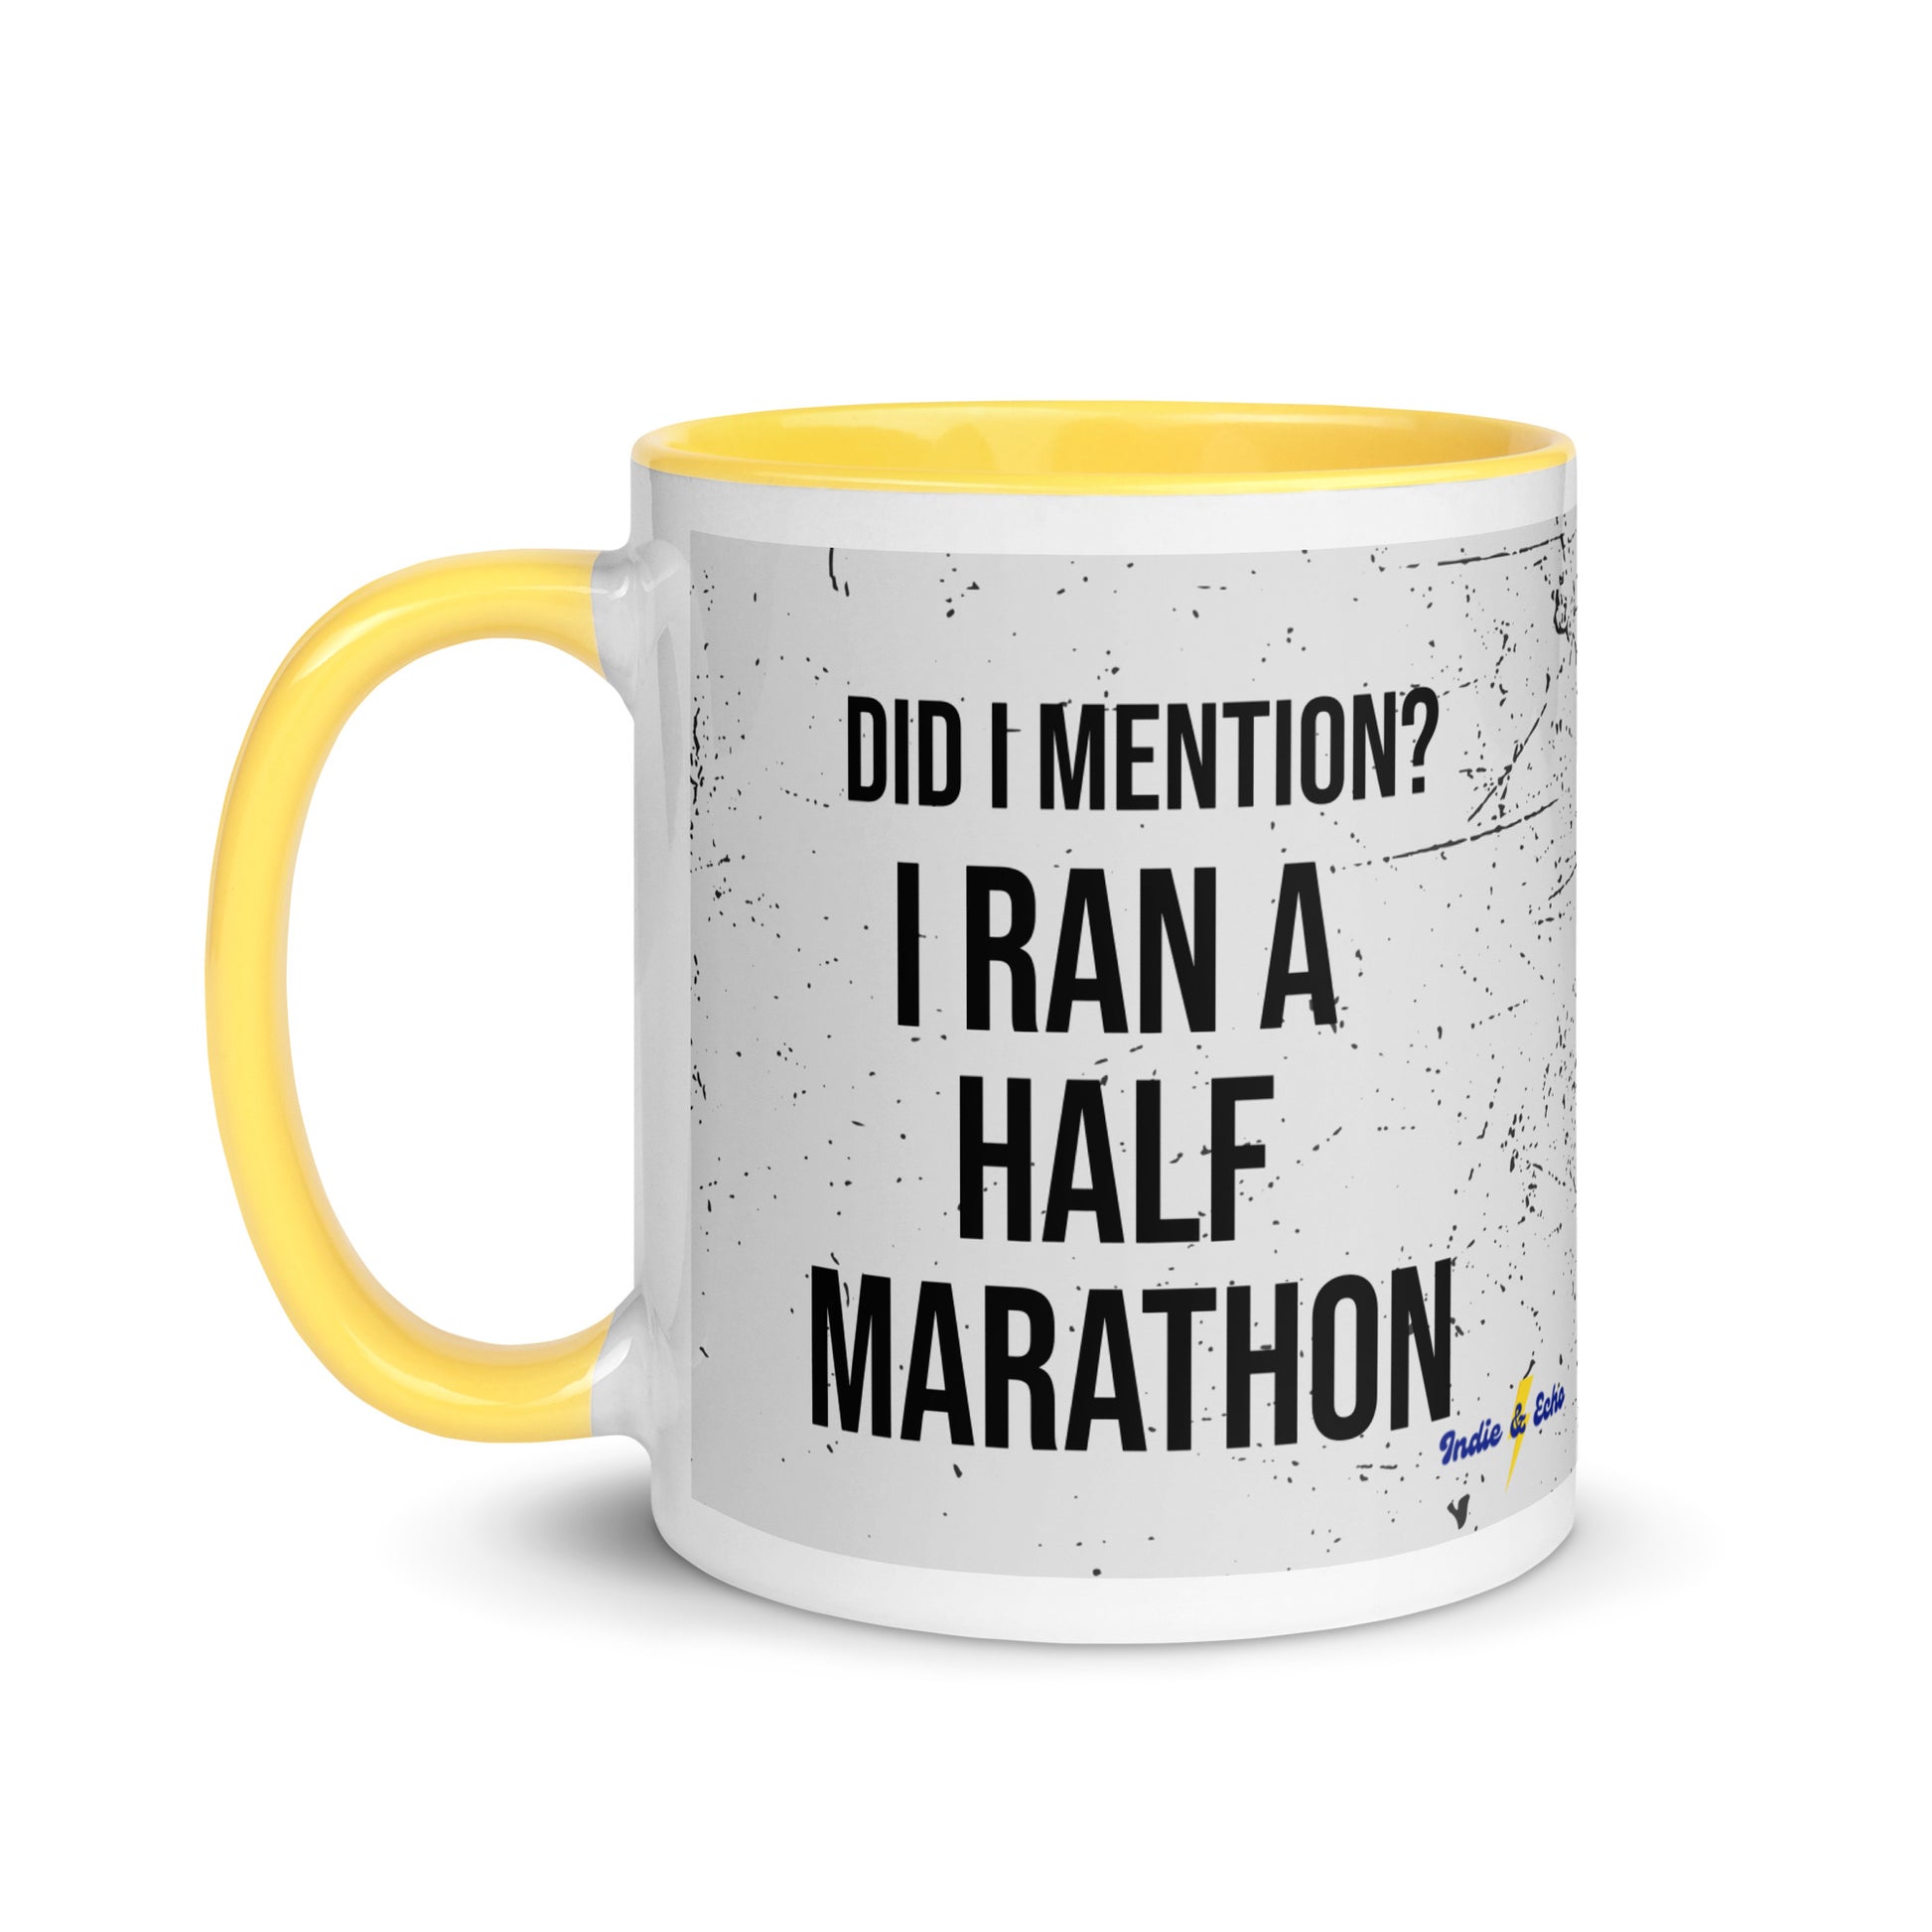 yellow handled mug with the words did I mention? I ran a half marathon in a bold font across a splatter effect background